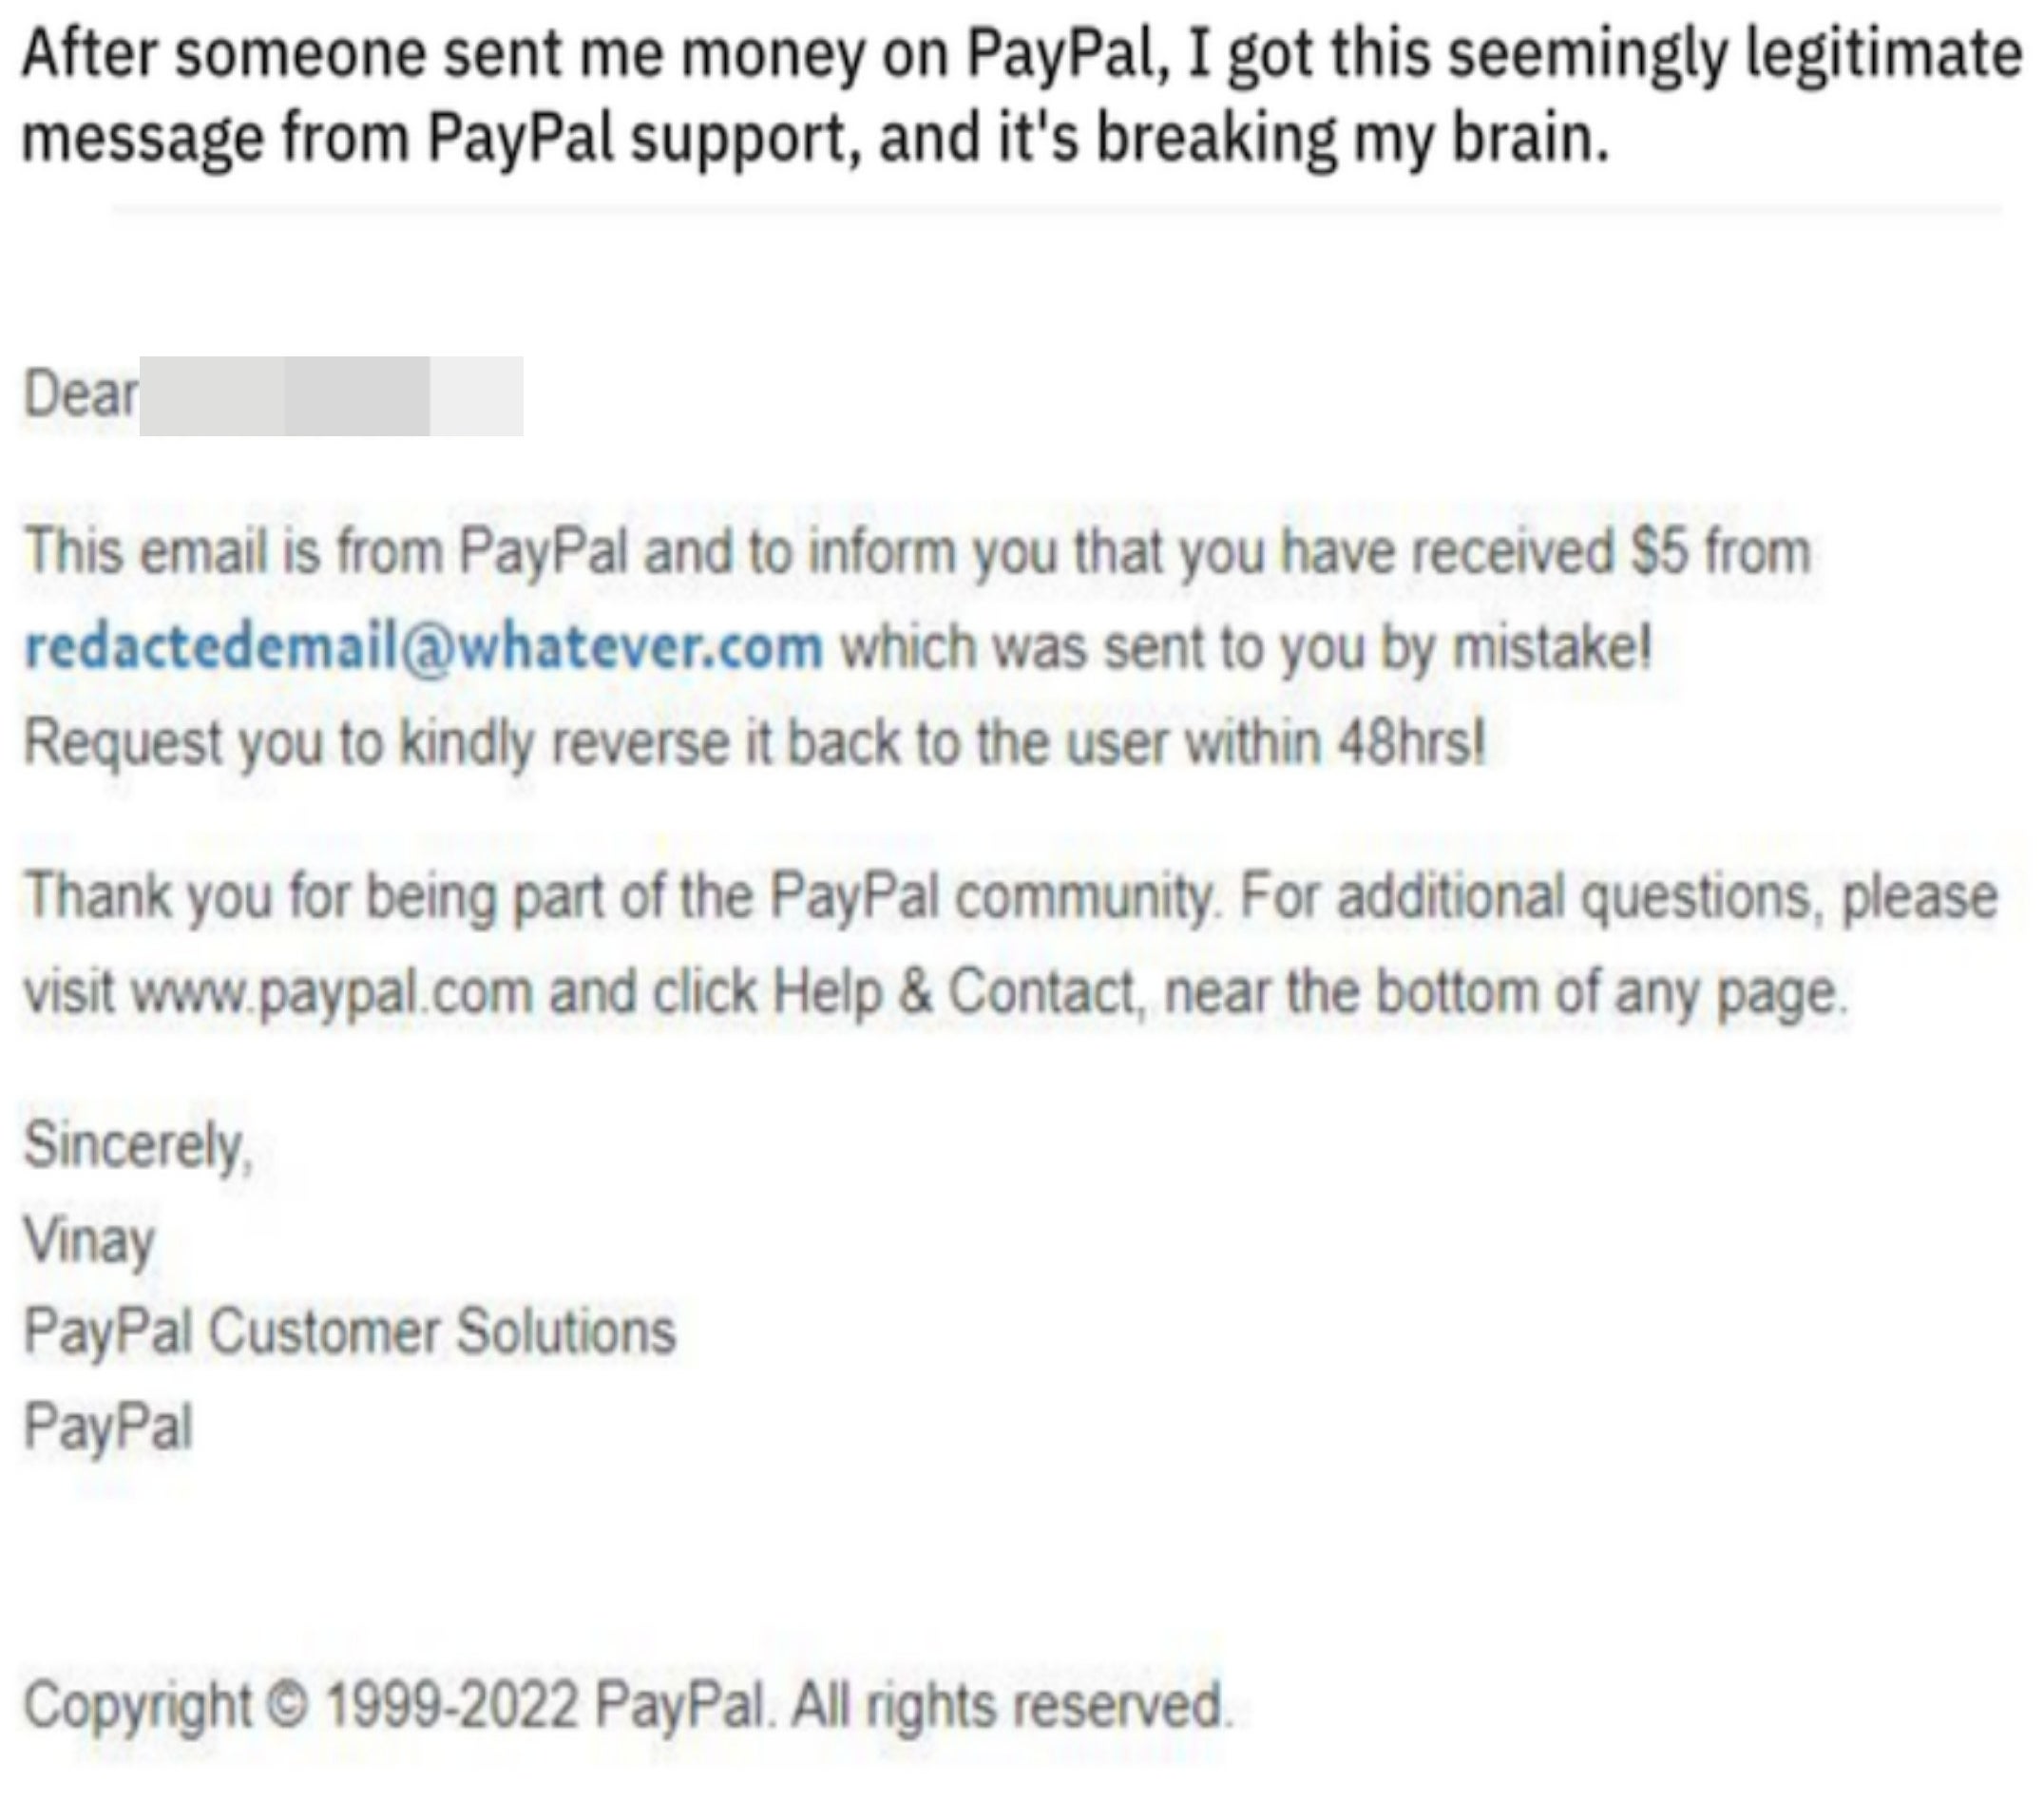 PayPal message that someone was sent $5 accidentally and needs to pay it back